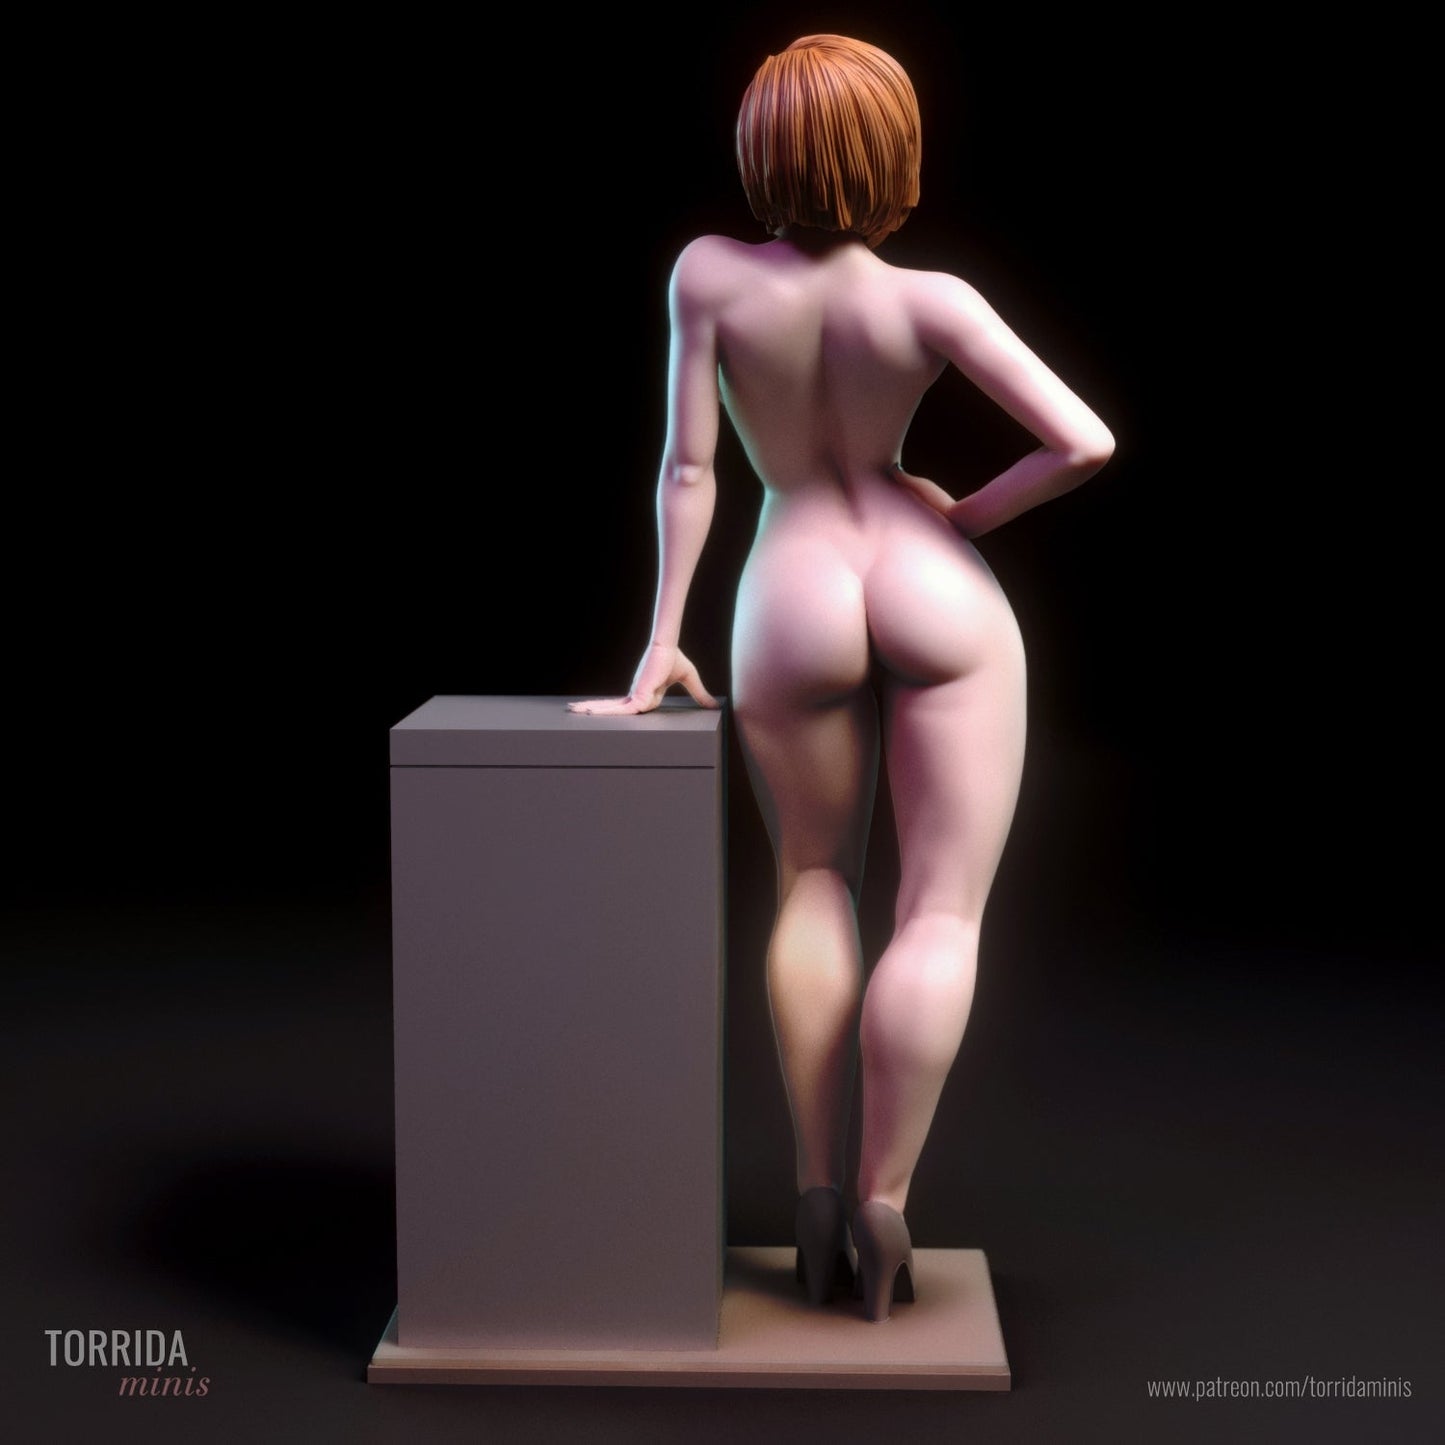 Dana Scully NSFW 3d Printed miniature FanArt by Torrida Statues & Figurines